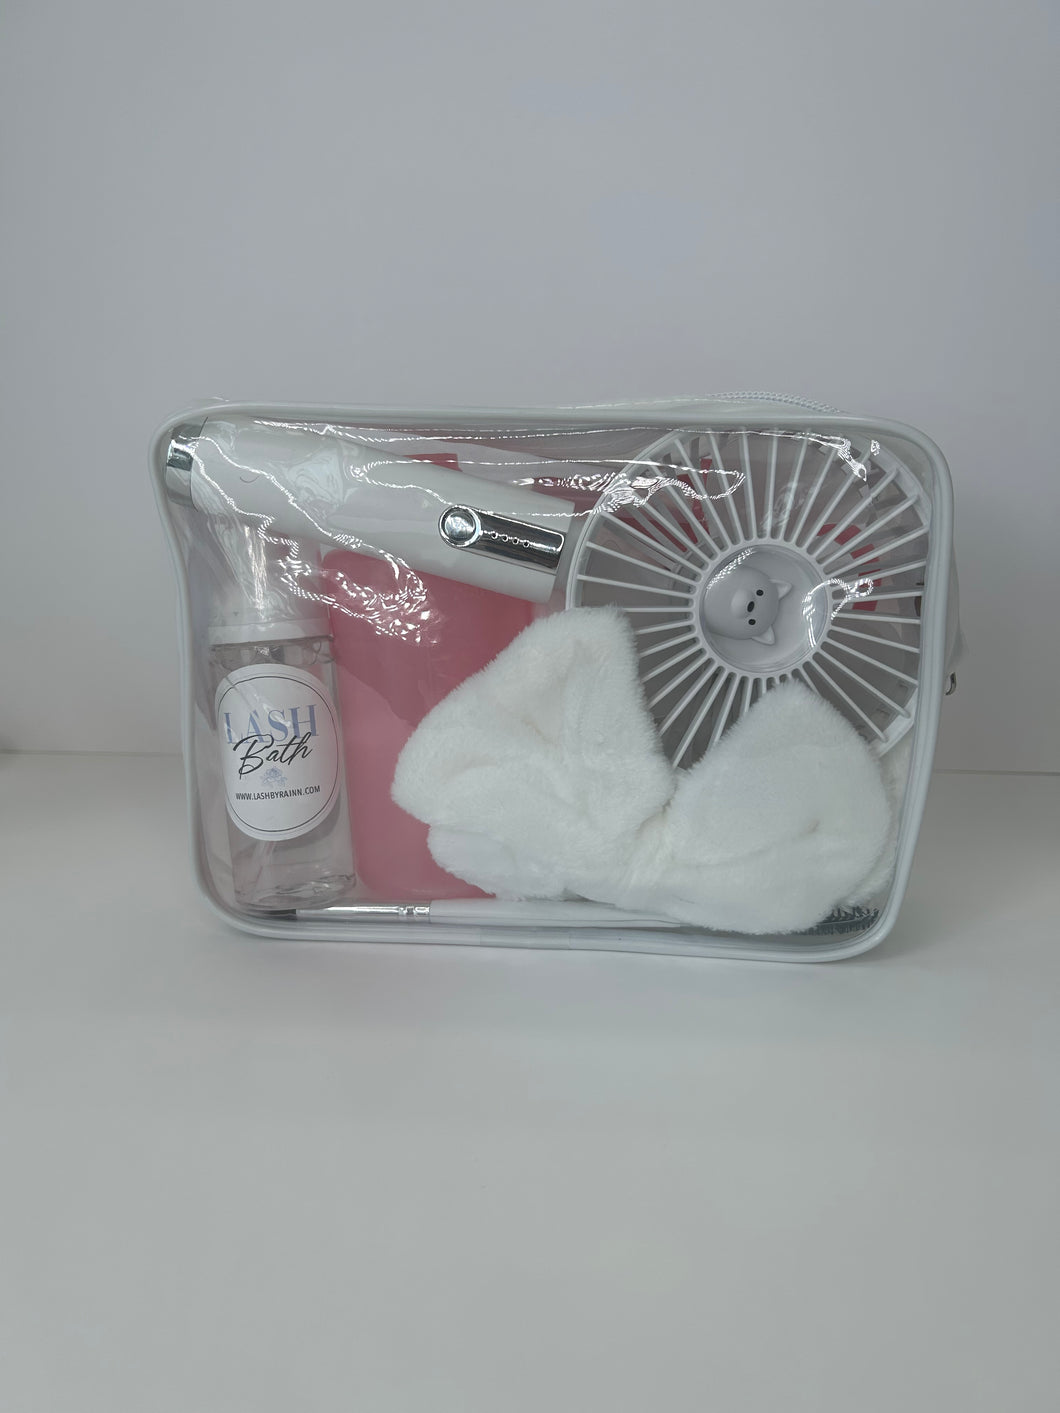 Deluxe Lash Aftercare bag